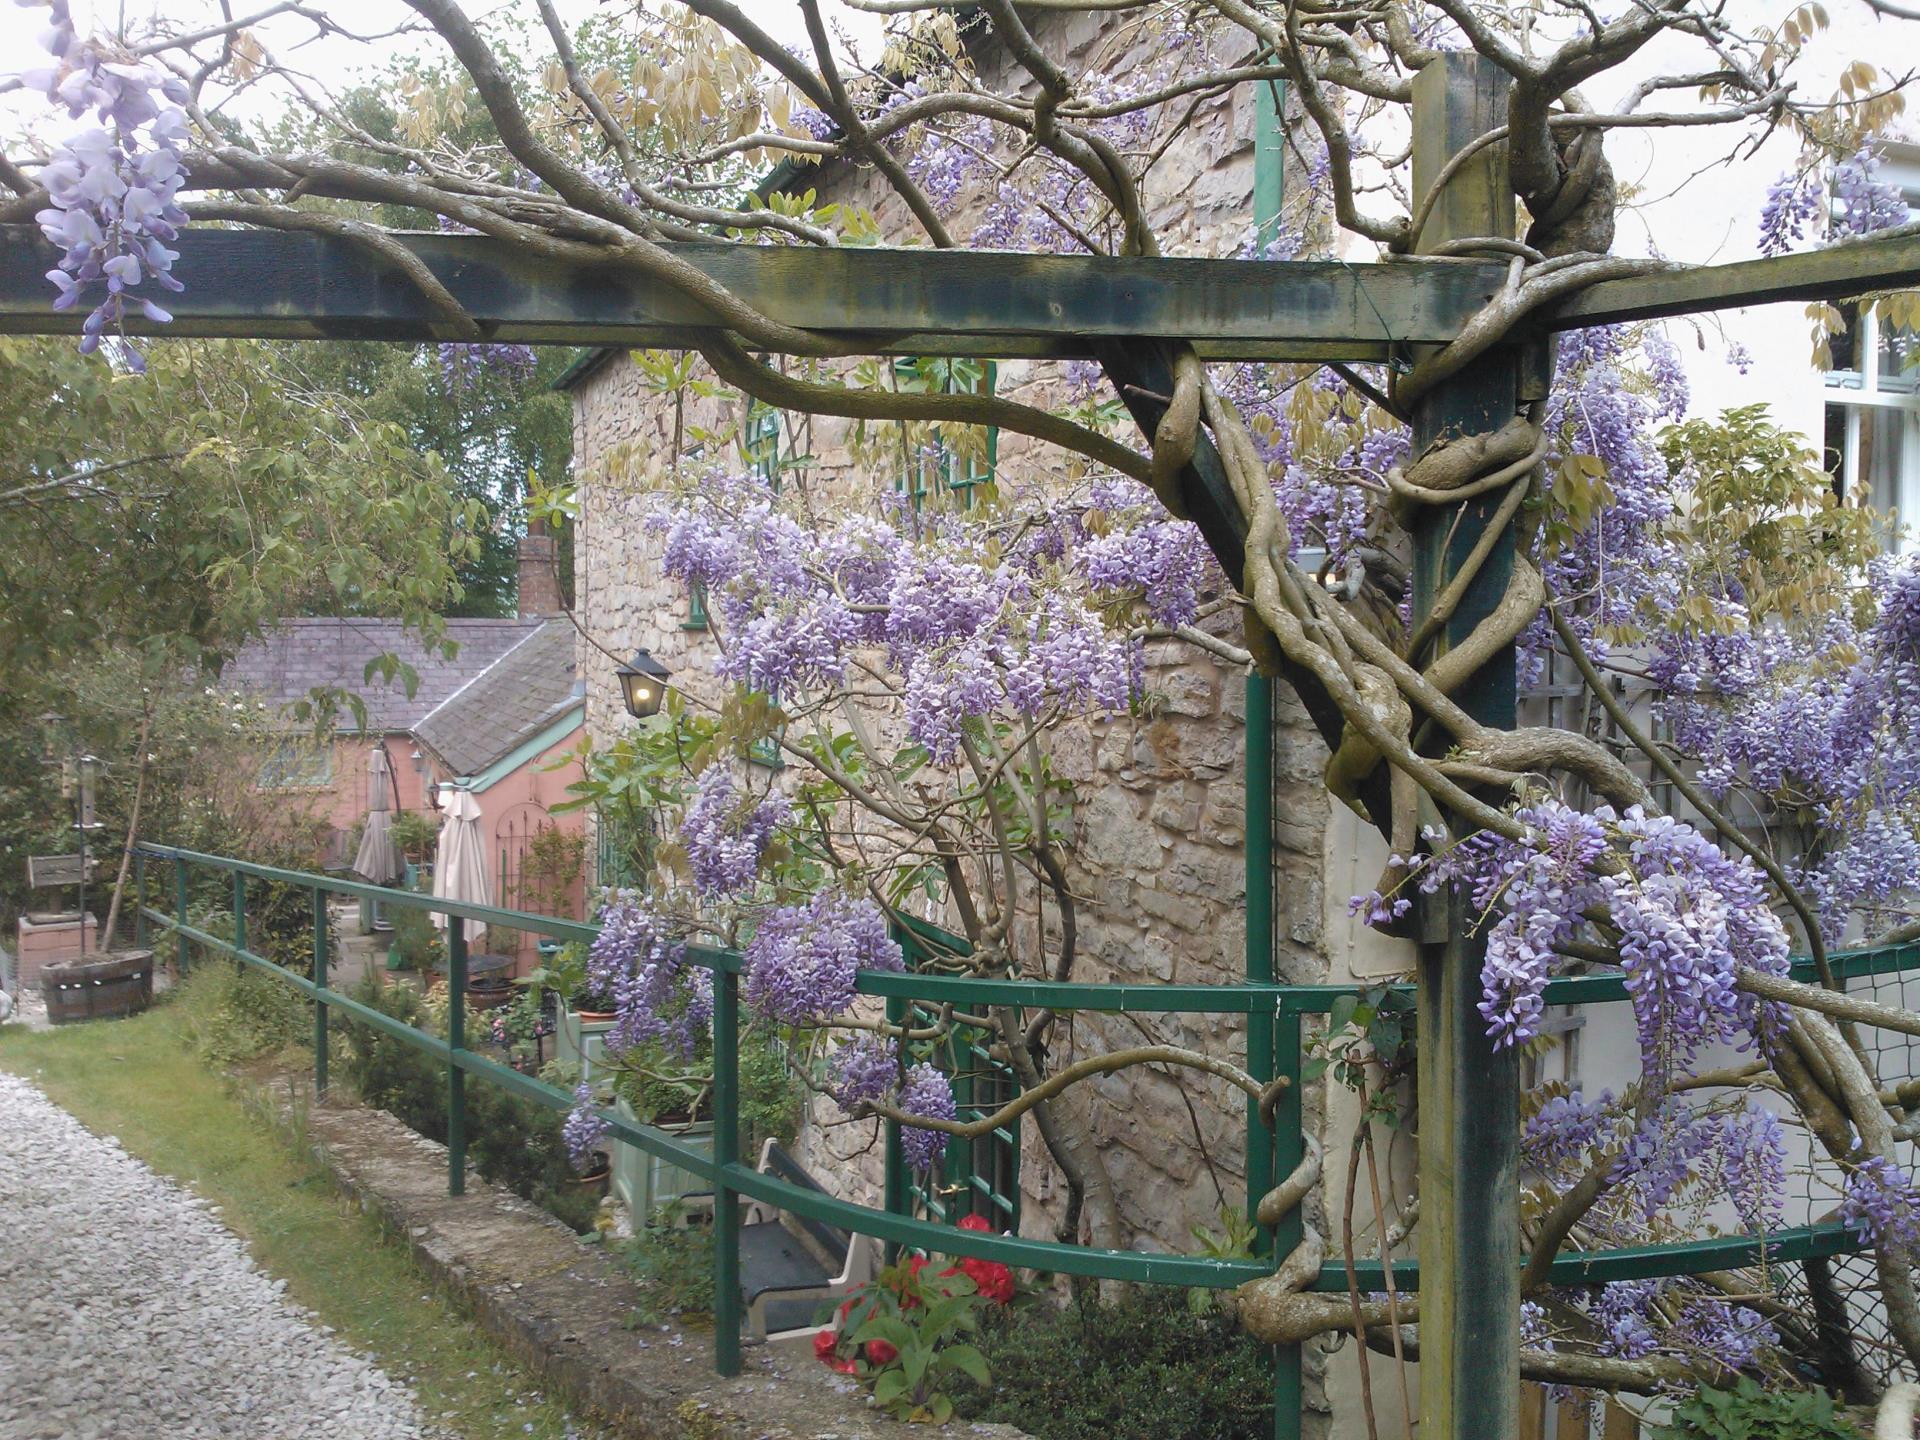 Wisteria at the back of the house